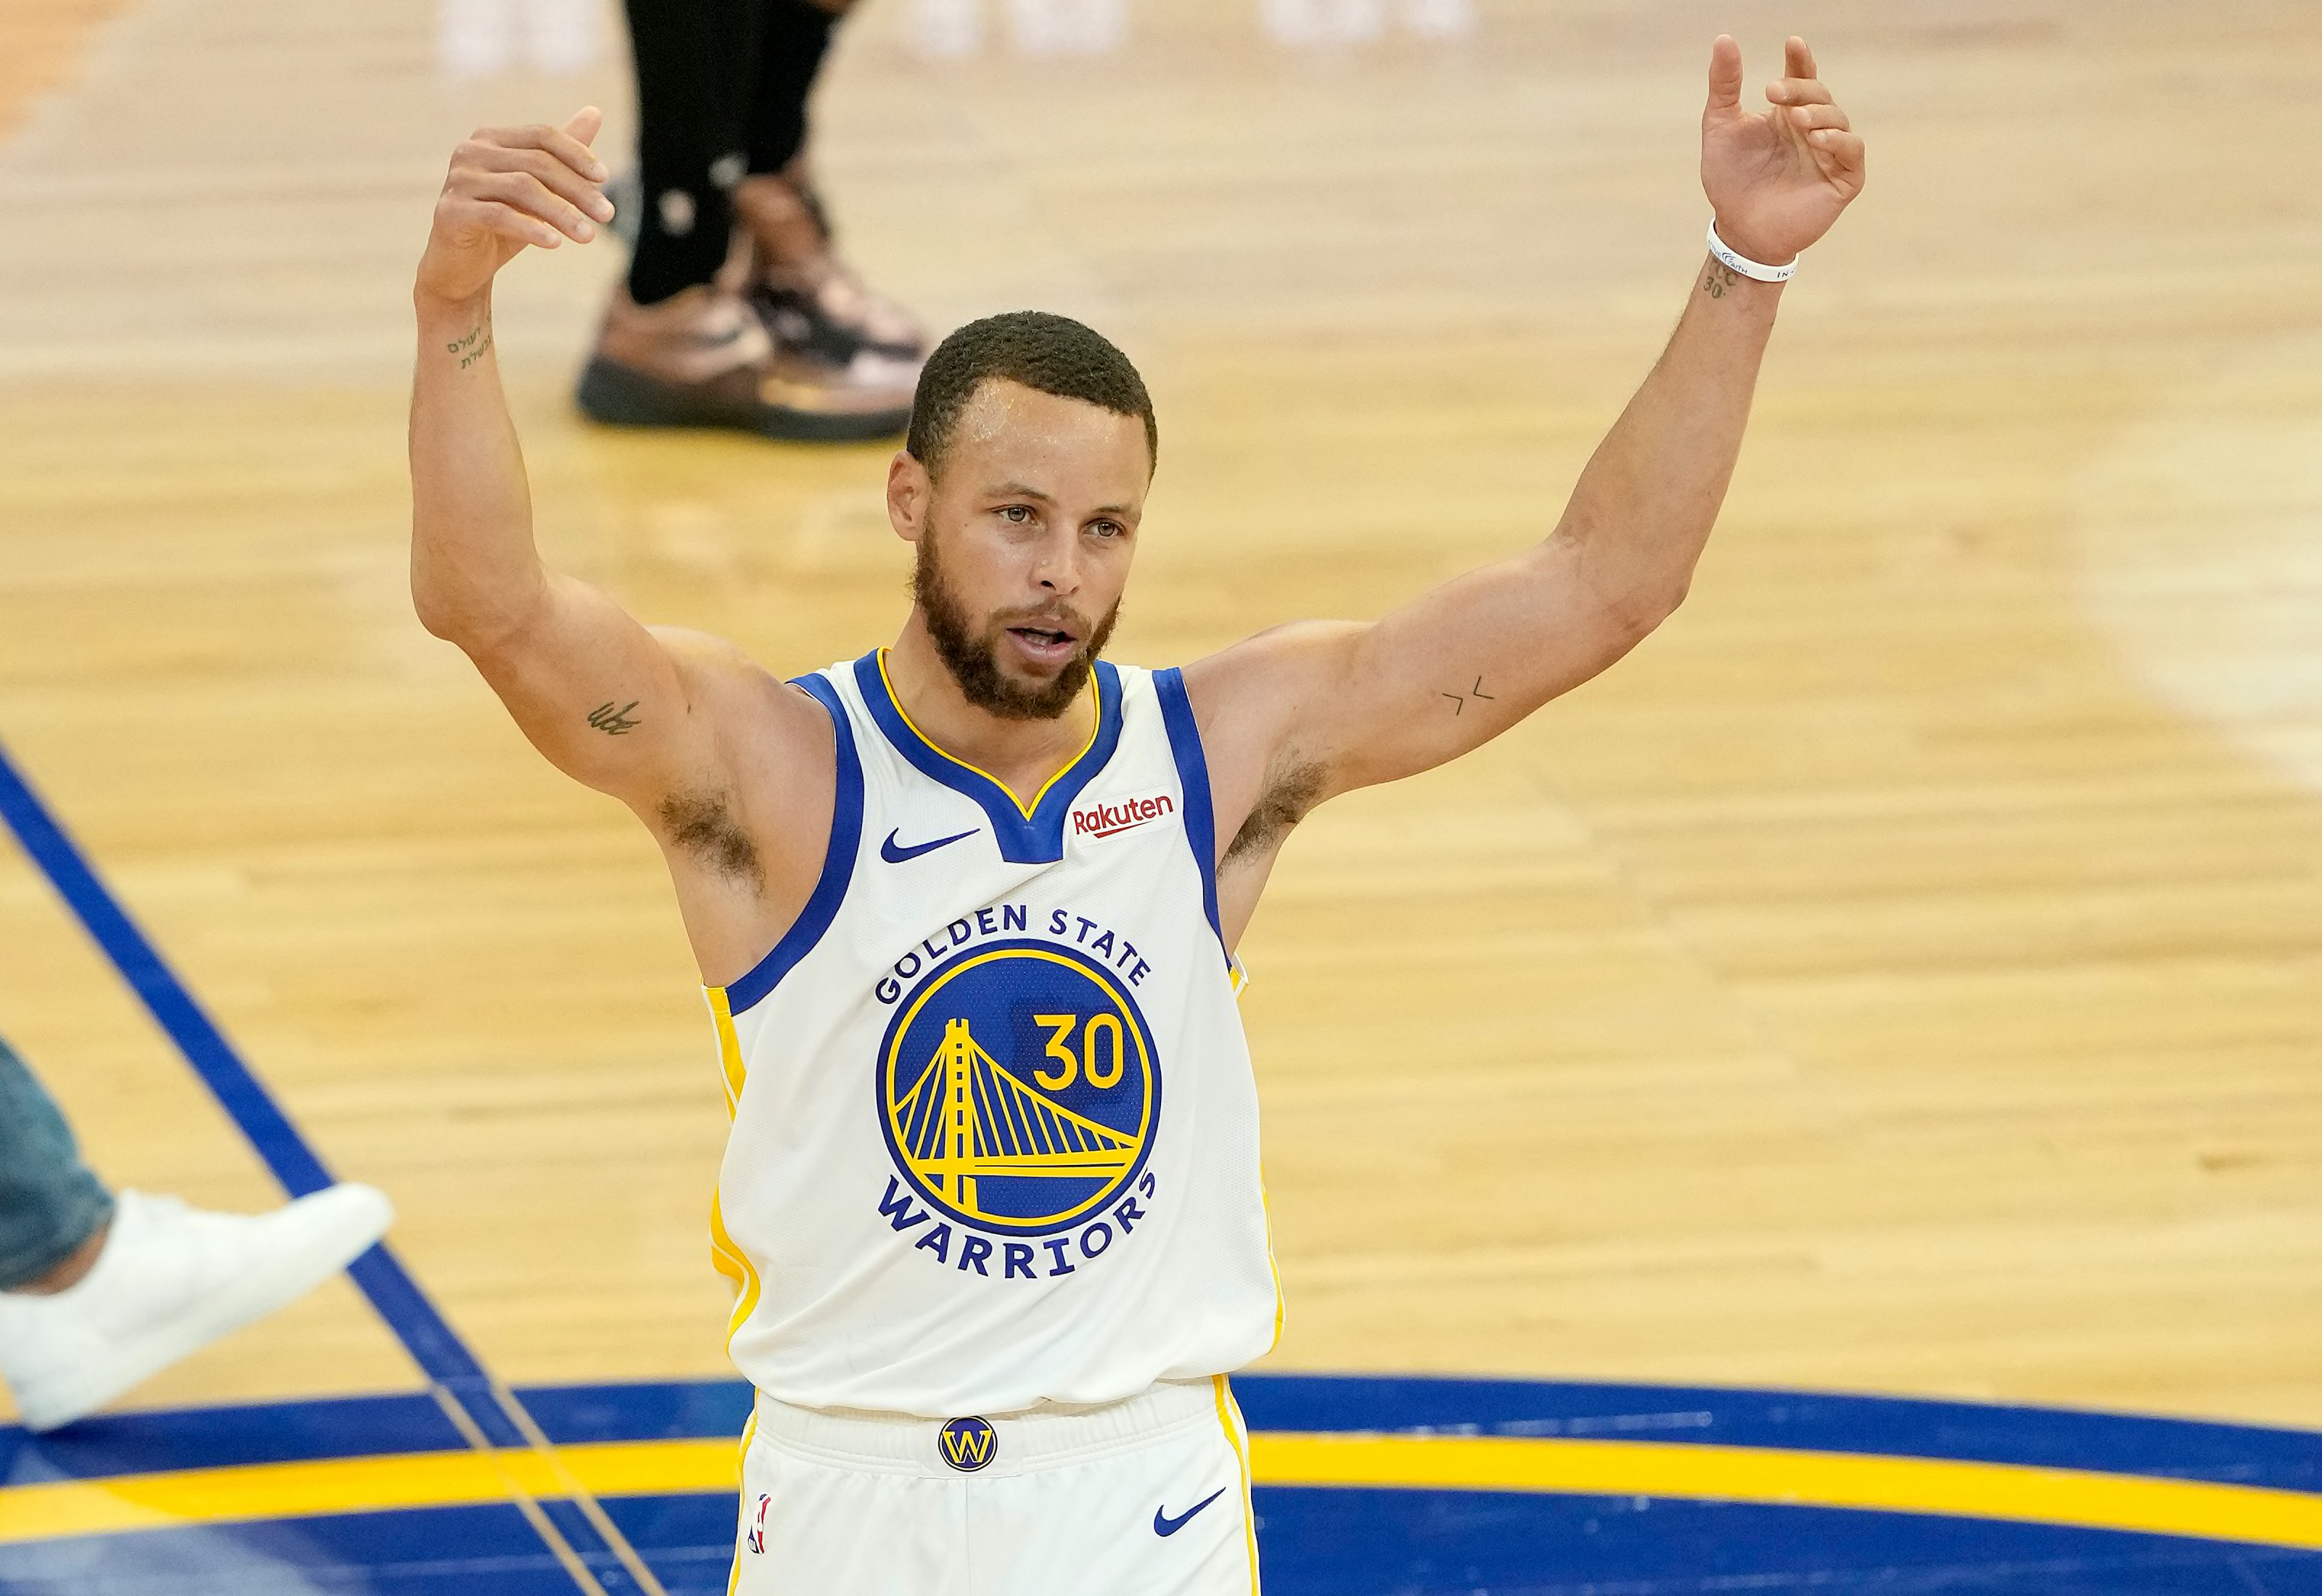 Why is Steph Curry's jersey number 30? All you need to know